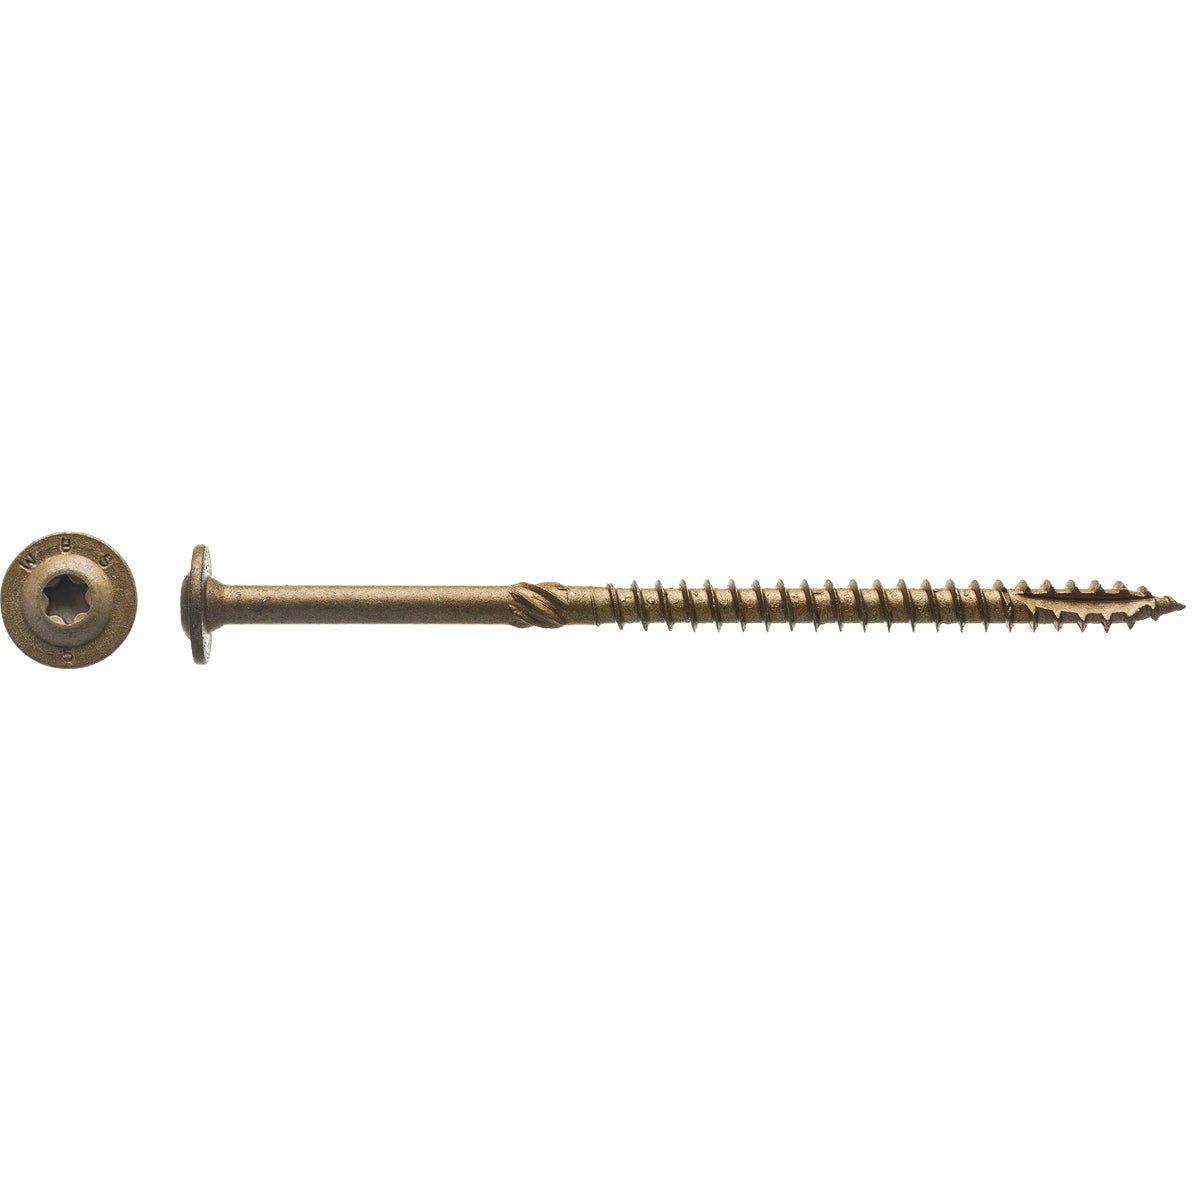 Big Timber #15 x 5 In. Structure Screw (350 Ct.)